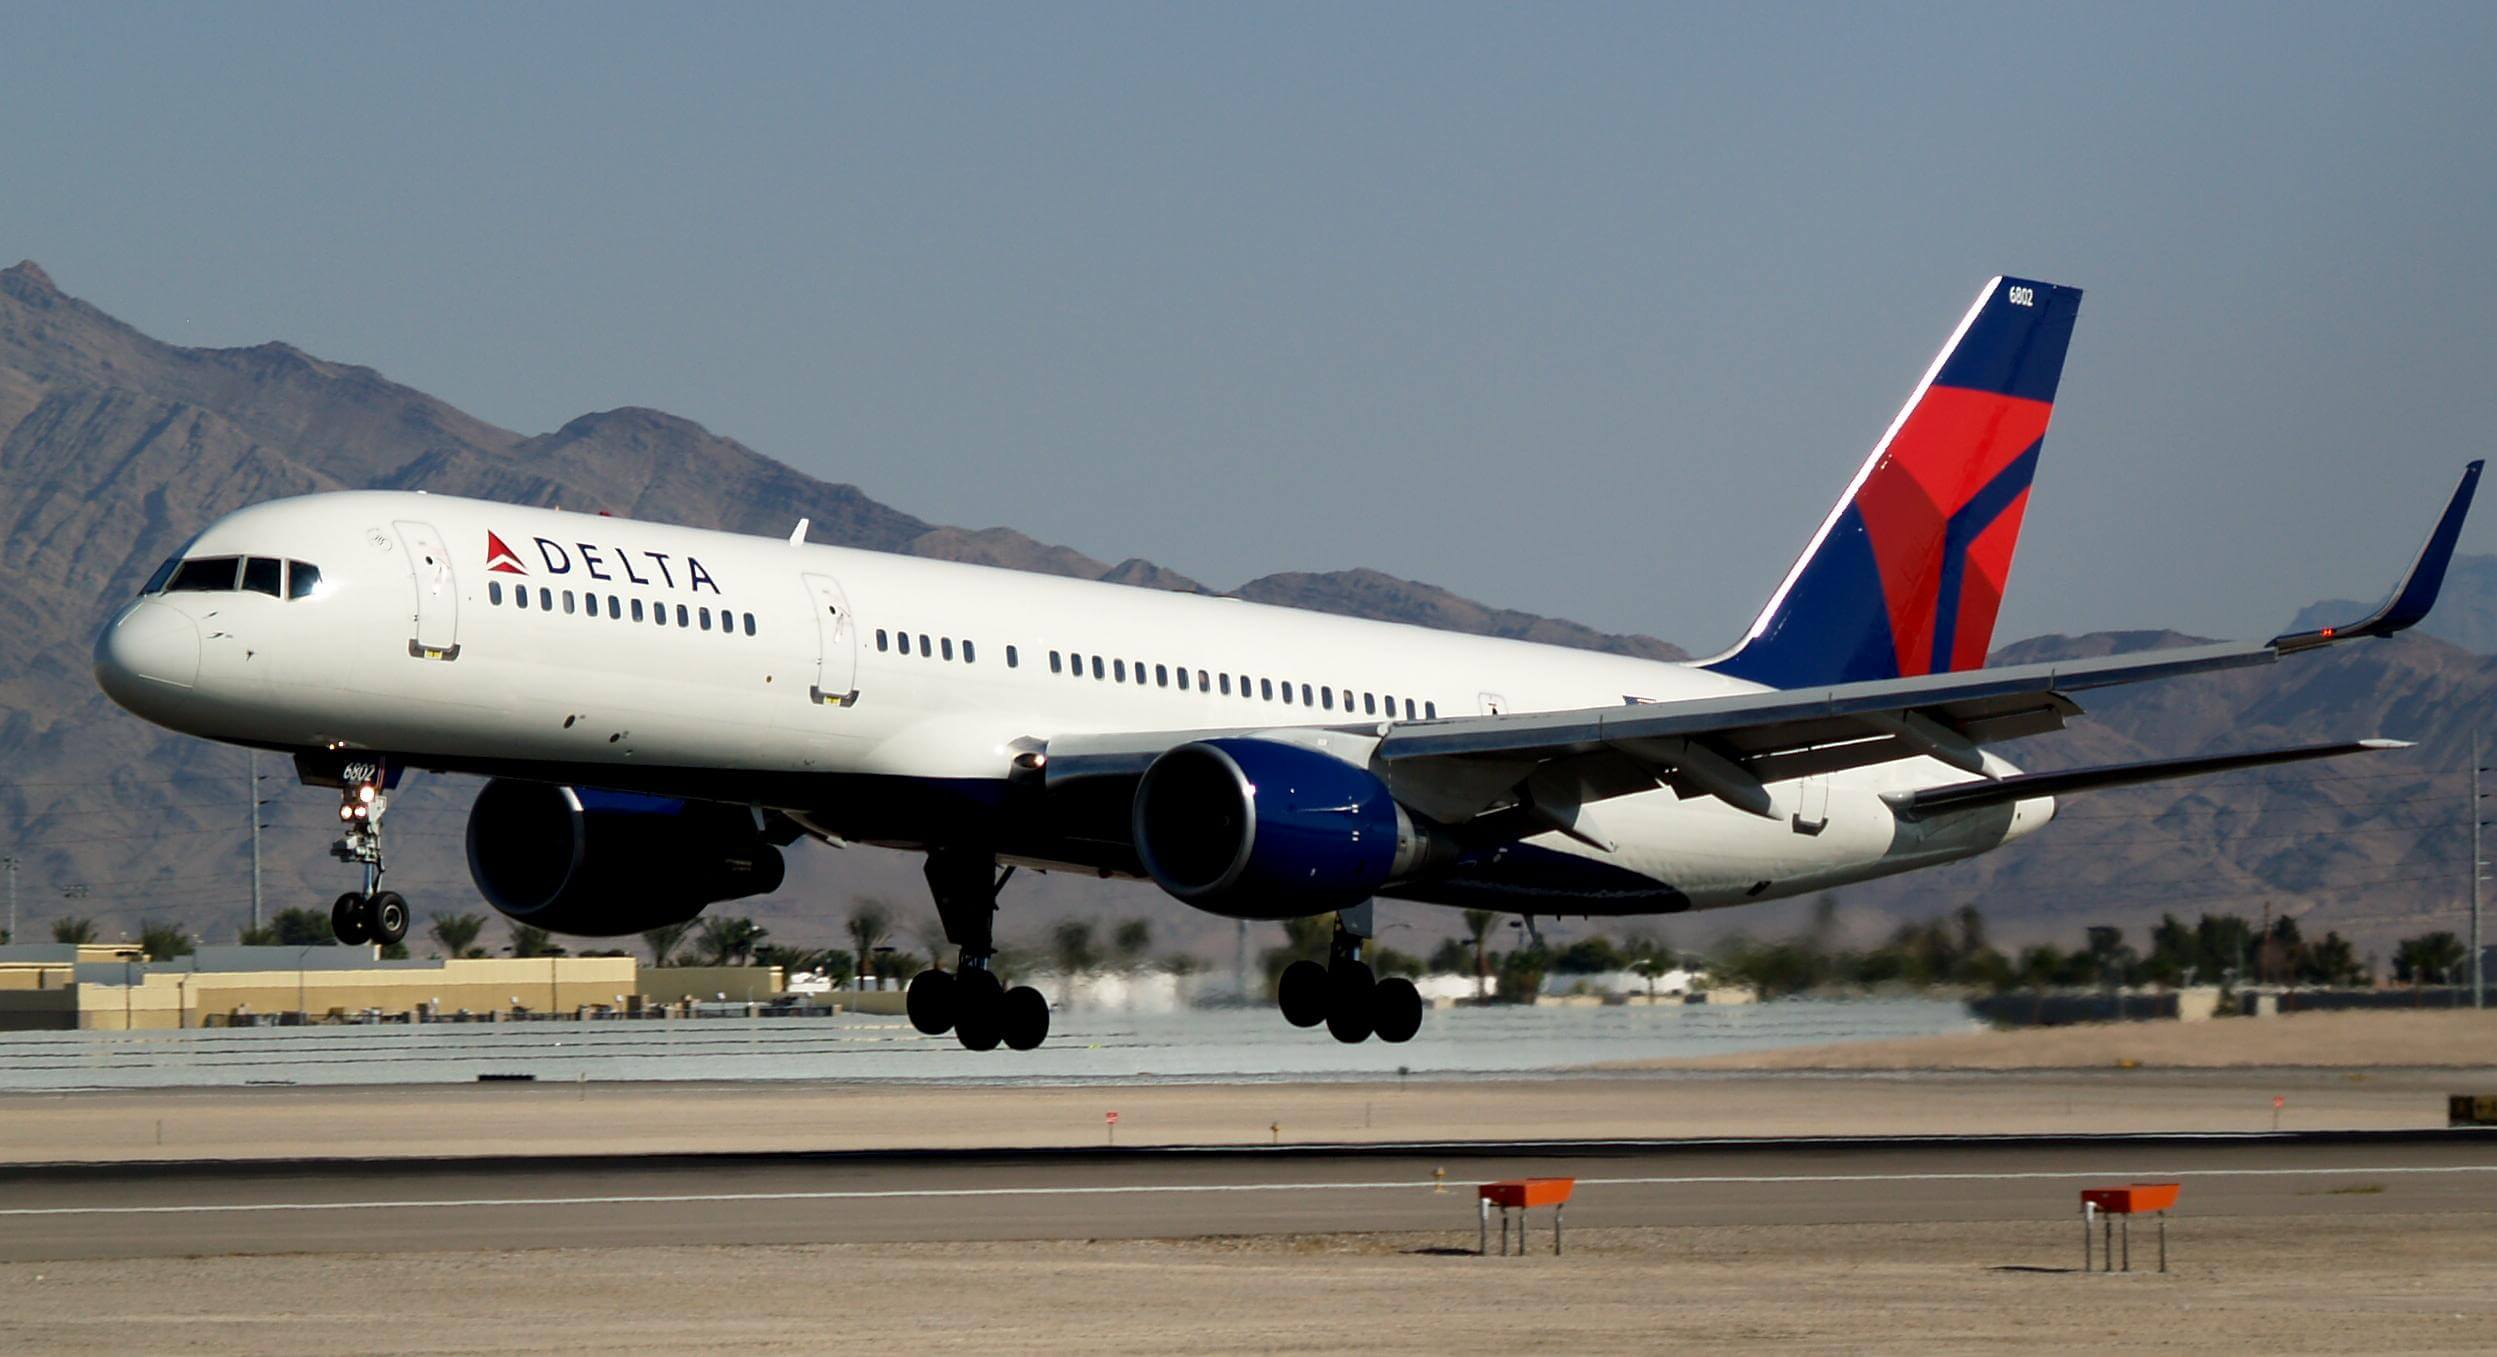 Delta Air Lines customer data compromised including payment information